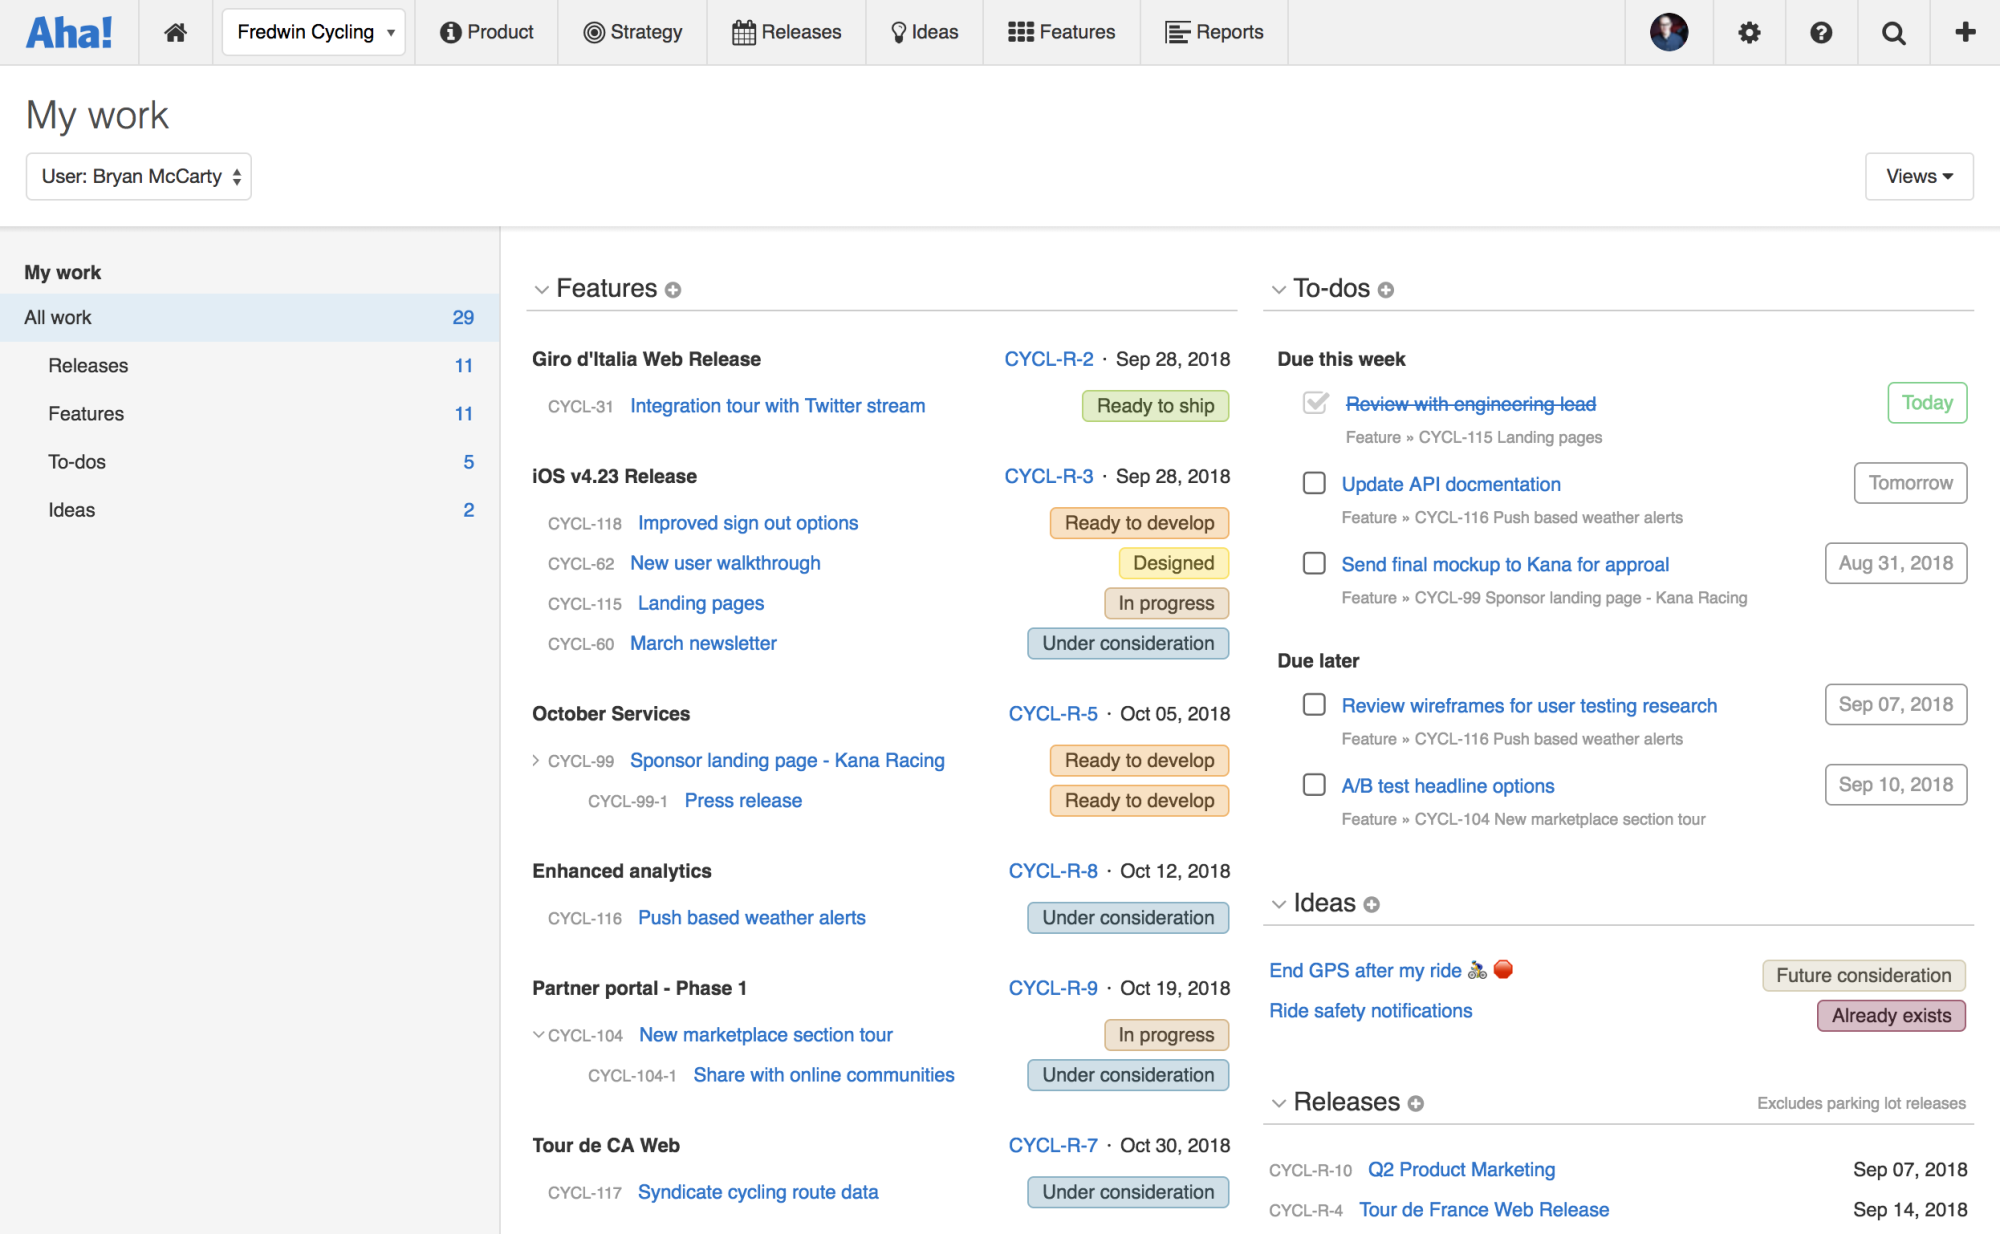 Blog - Just Launched! — One Place to Manage All of Your Product Management Tasks - inline image